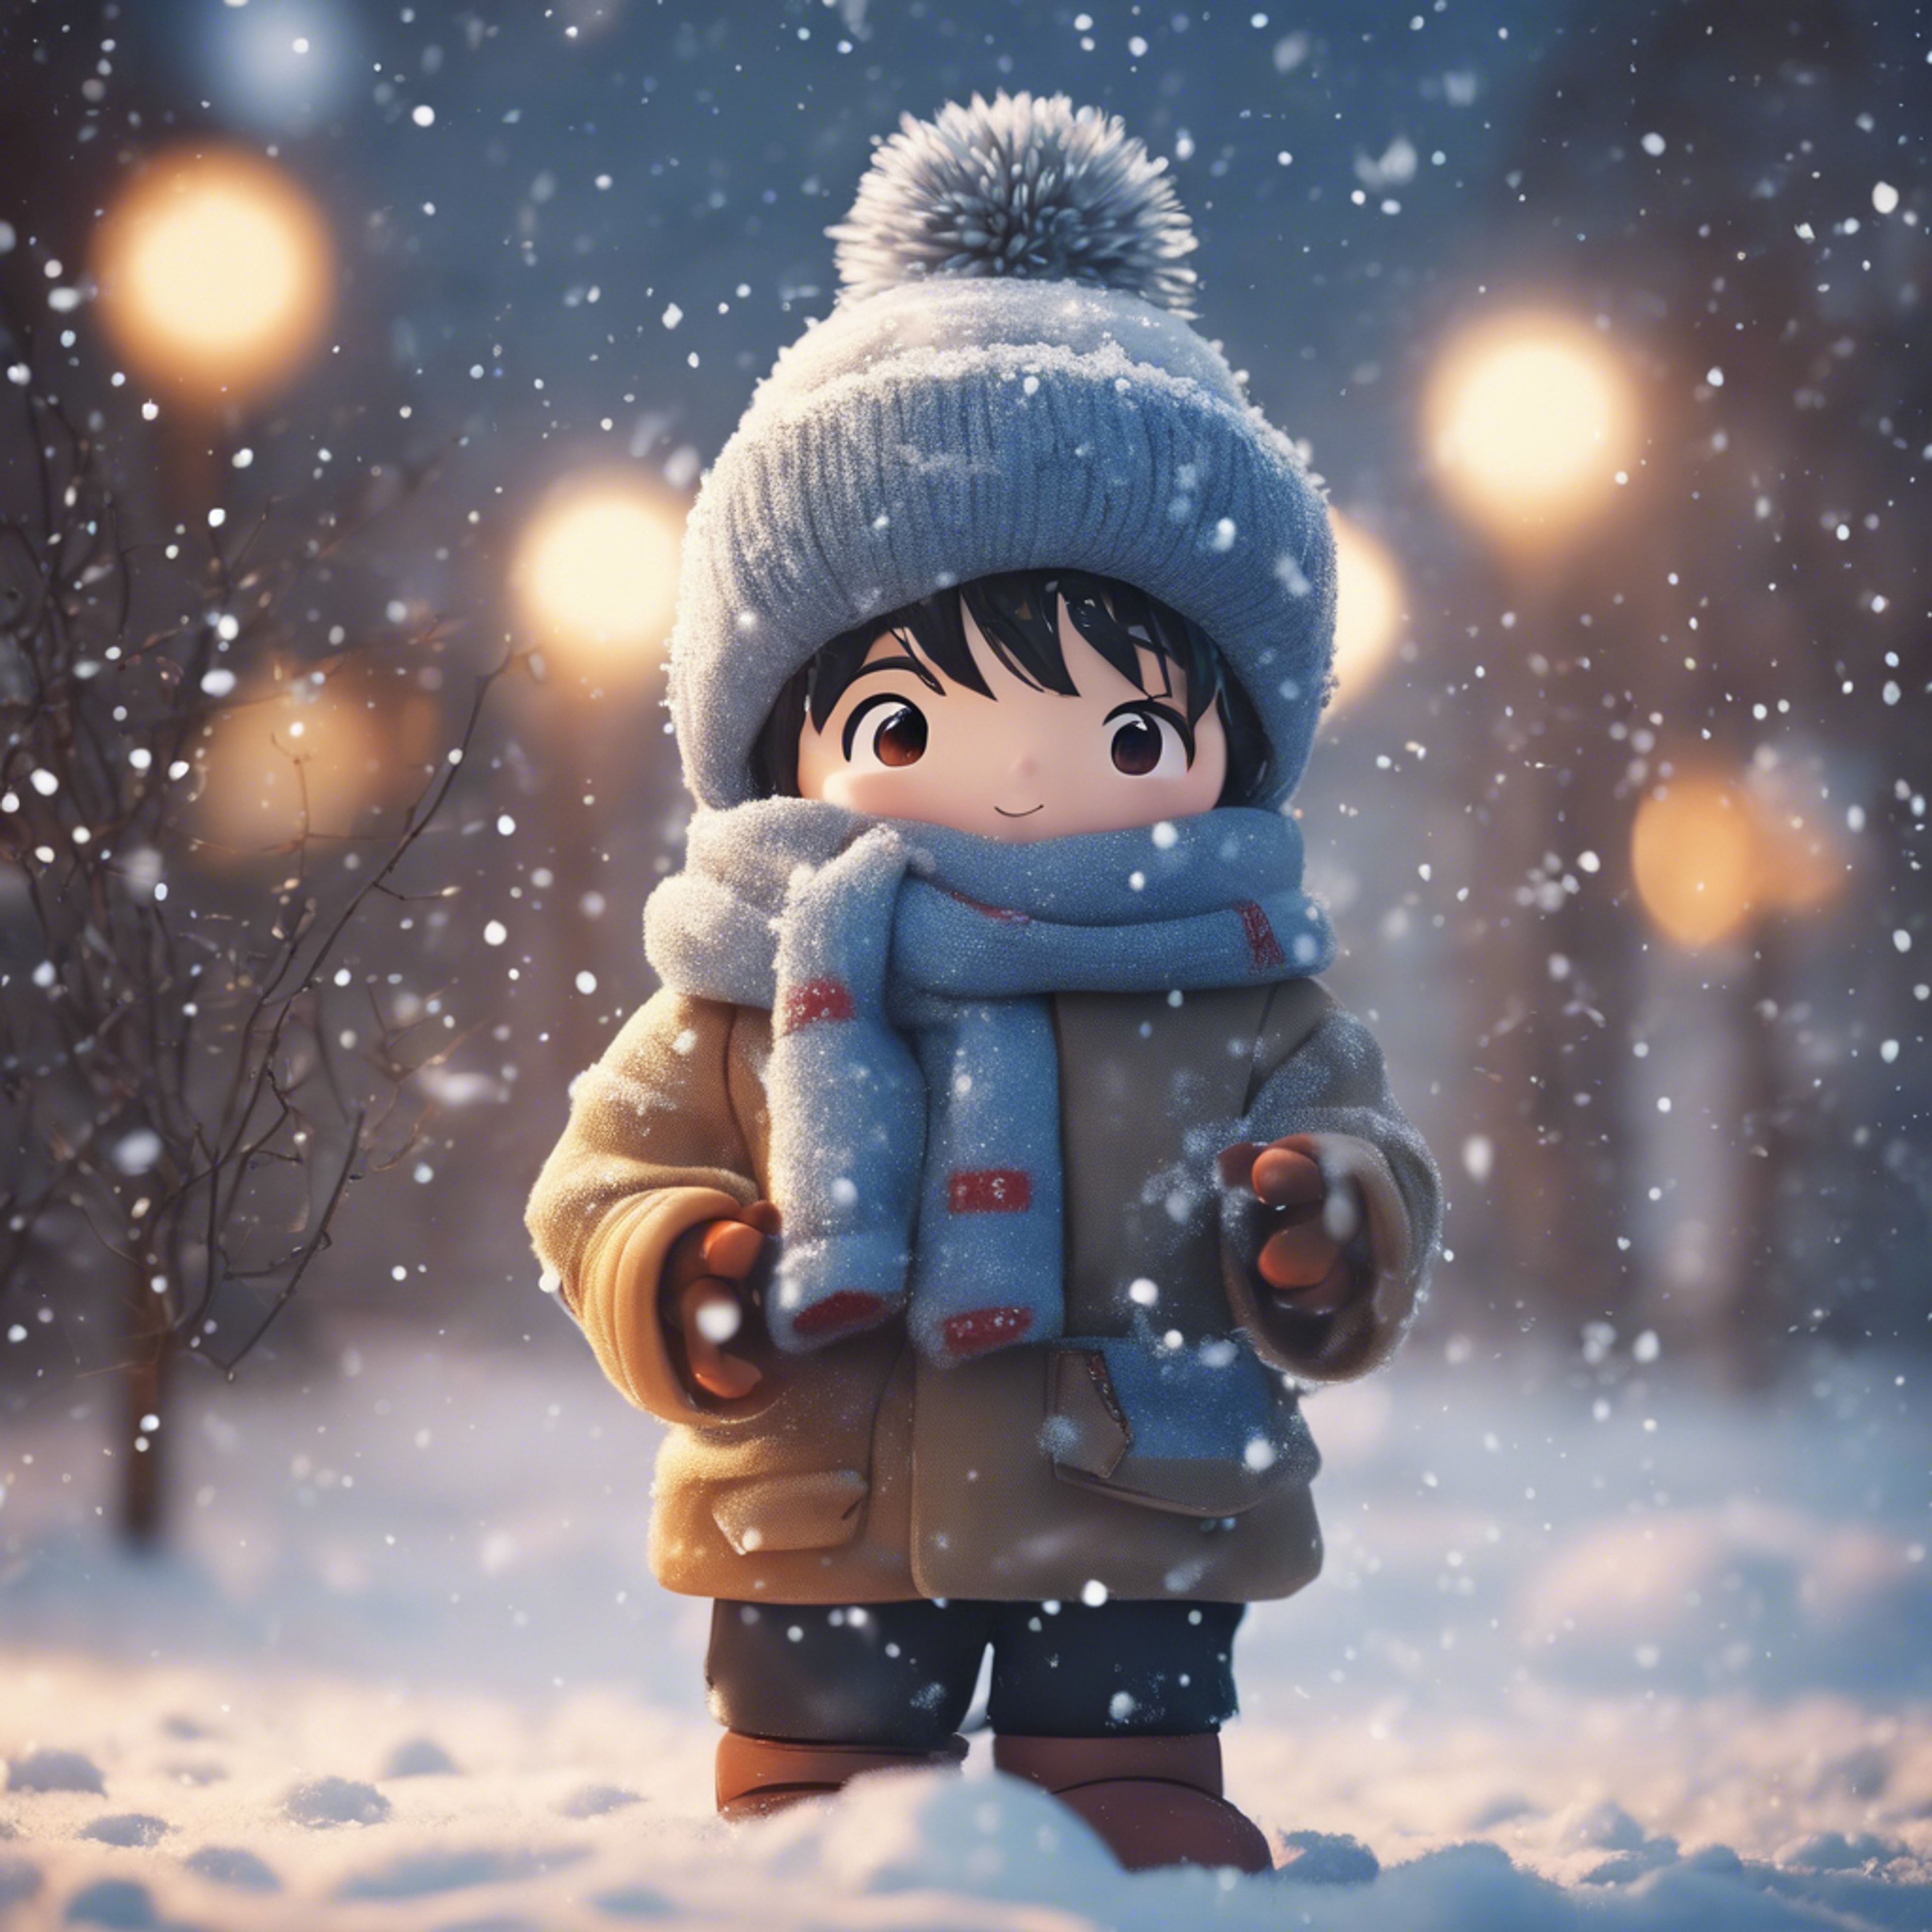 Anime boy wrapped in warm winter clothes, building a playful snowman in the snowfall. Tapet[d4075dc9b13644f685e7]